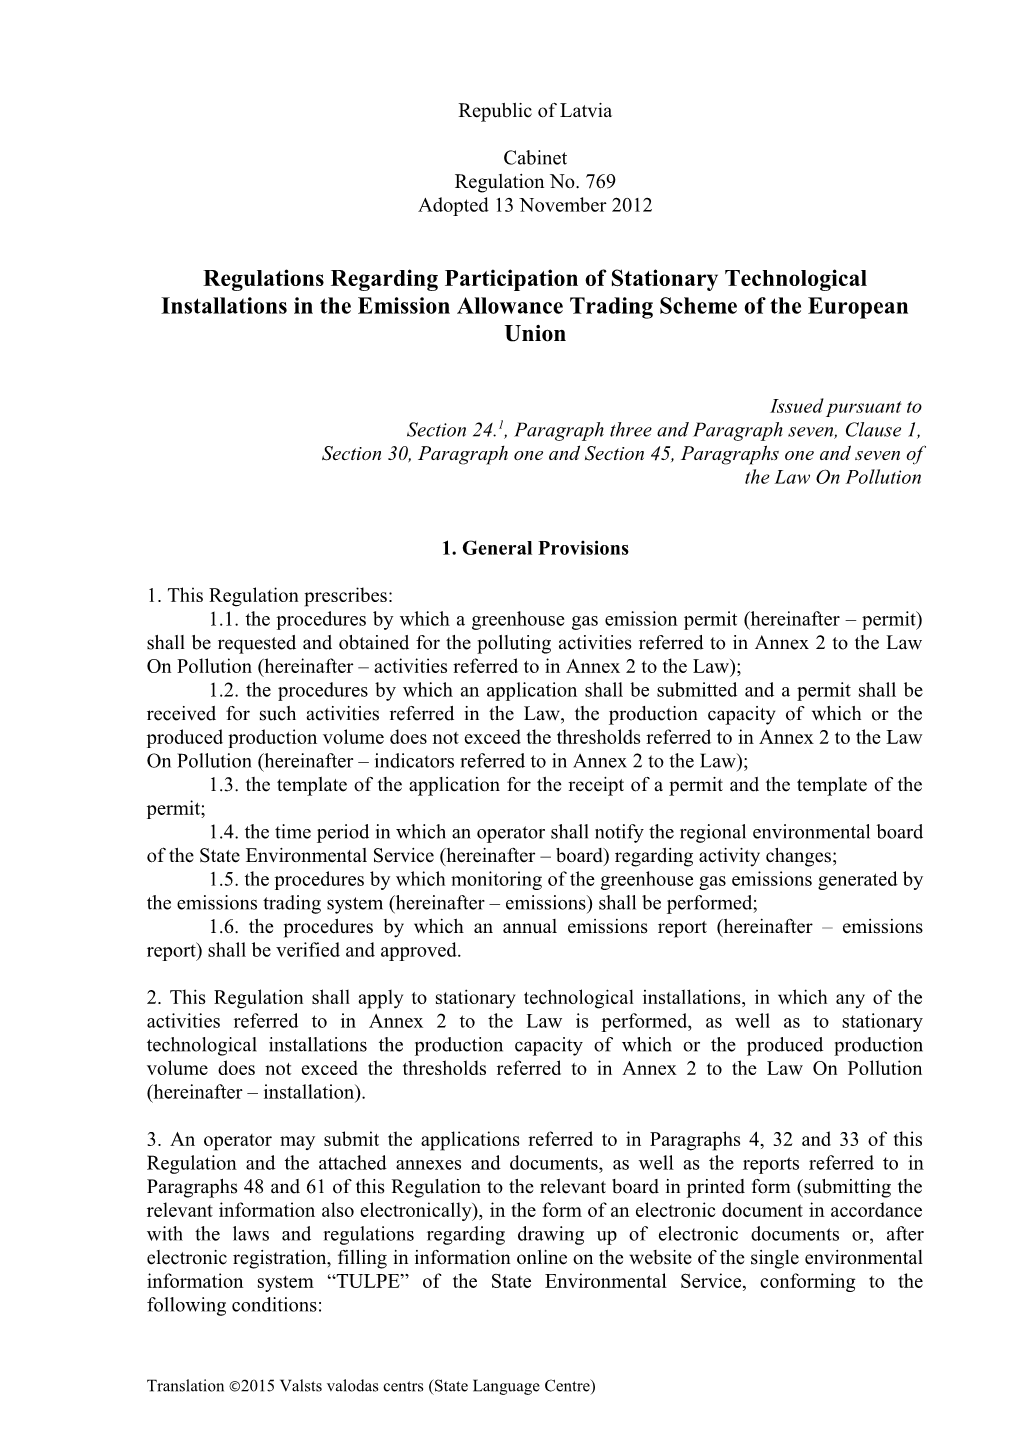 Regulations Regarding Participation of Stationary Technological Installations in the Emission